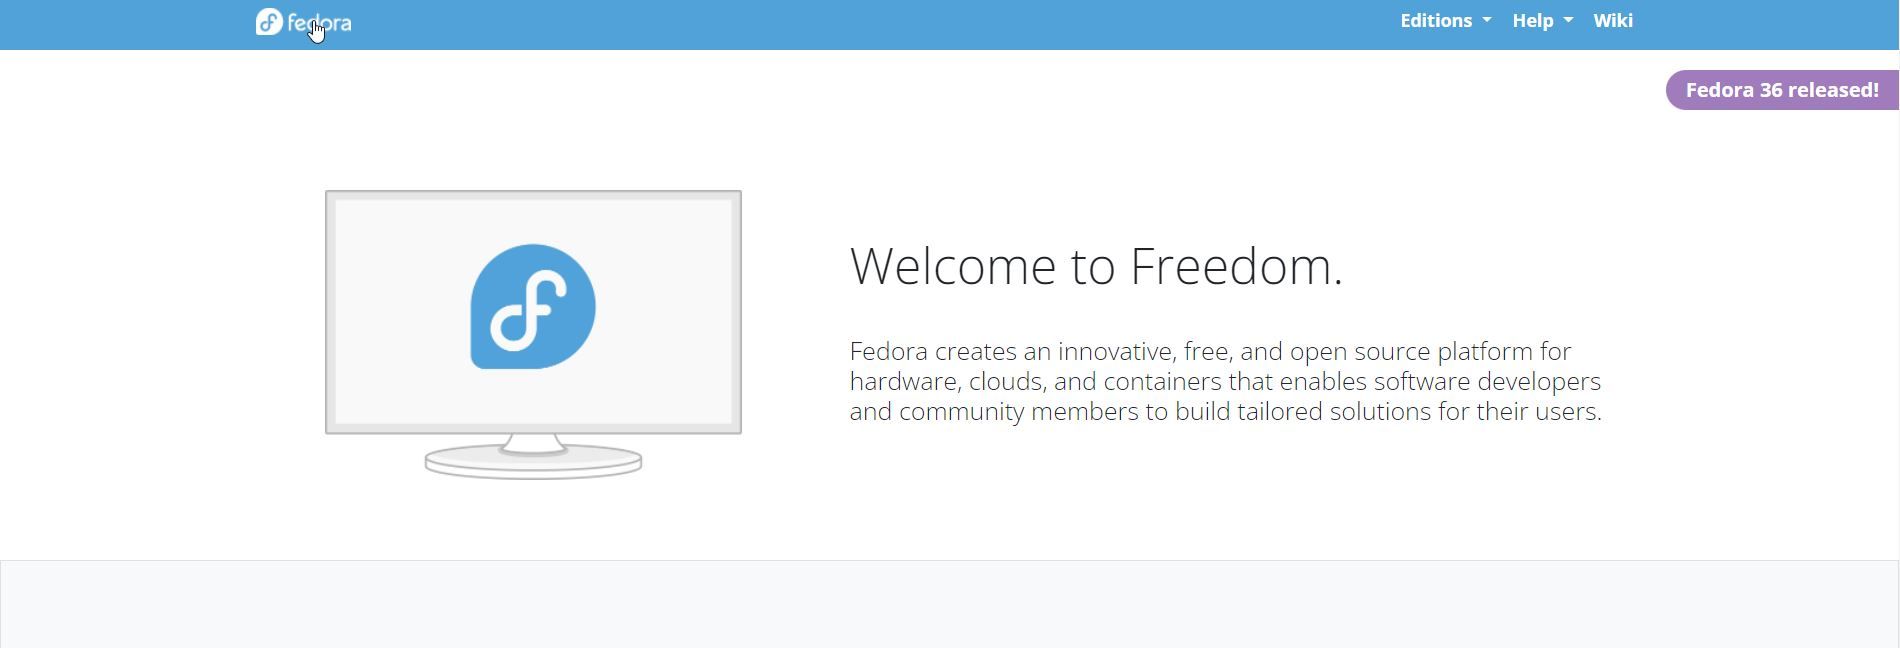 Fedora Website with Fedora 36 Release Announcement Banner